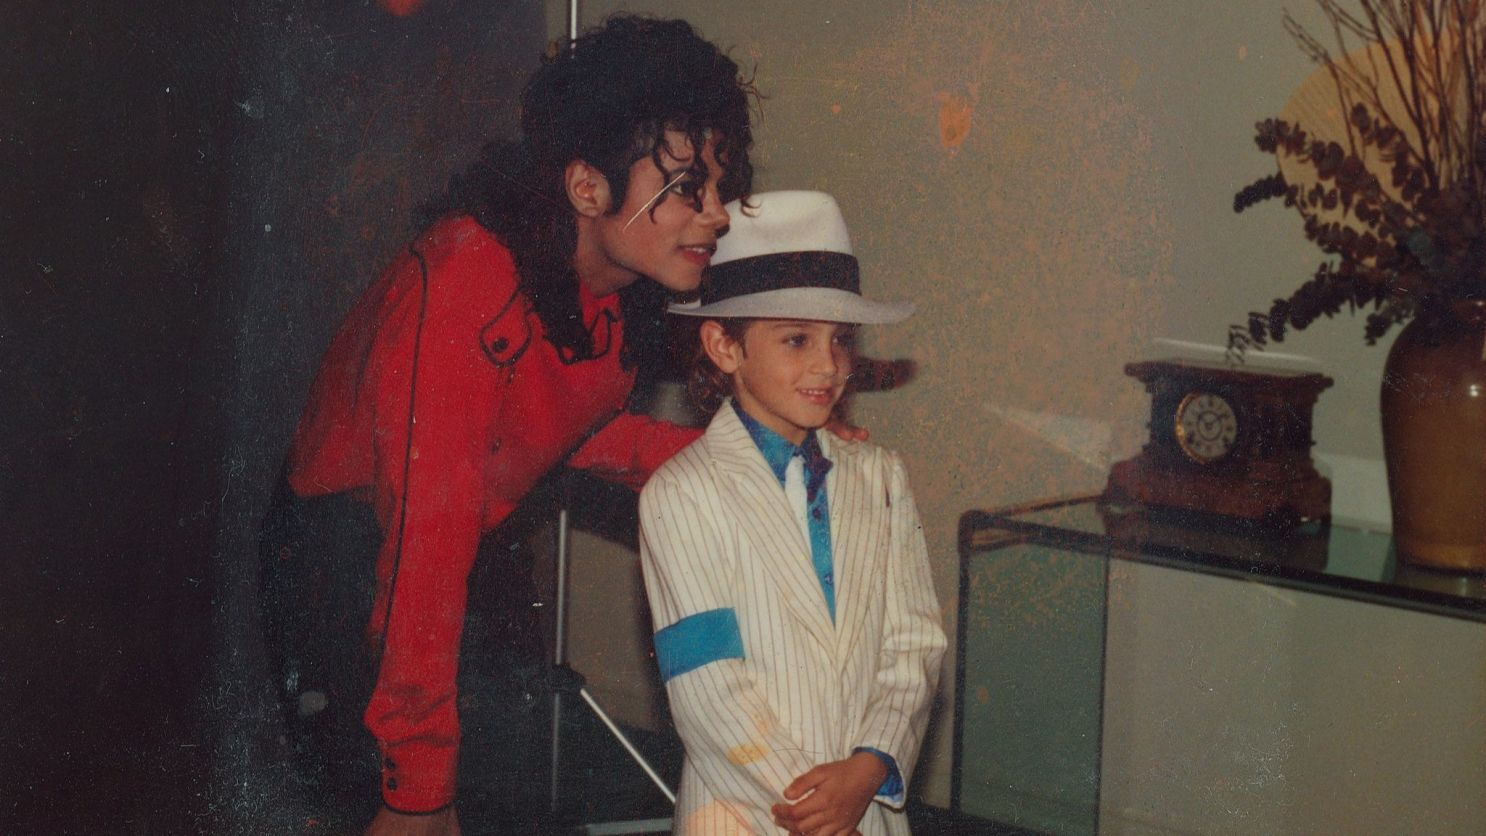 Wade Robson's dancing at a young age caught the attention of Michael Jackson in 1987